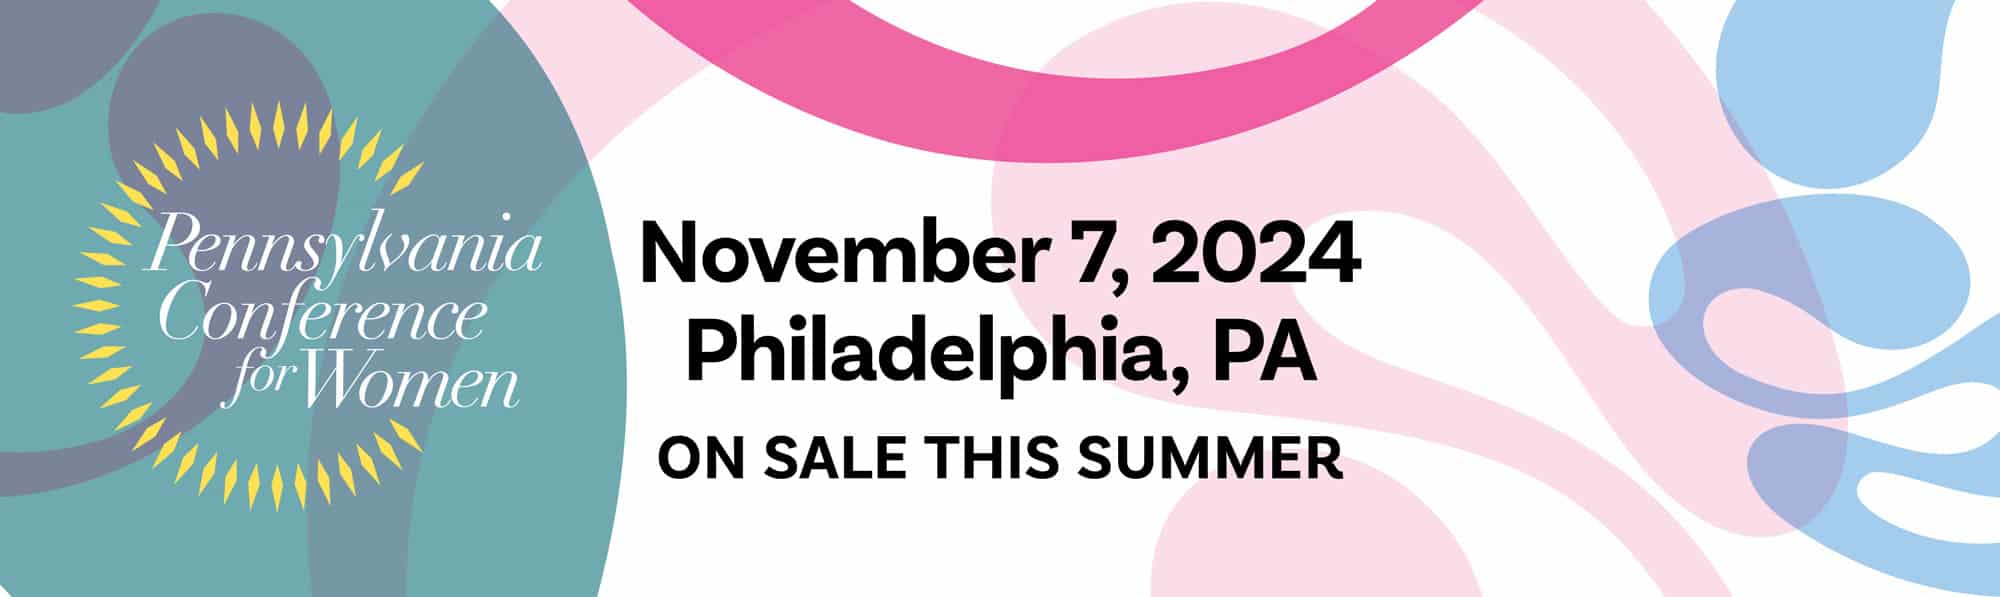 PA Conference for Women: November 7, 2024. Philadelphia, PA. On sale this summer.